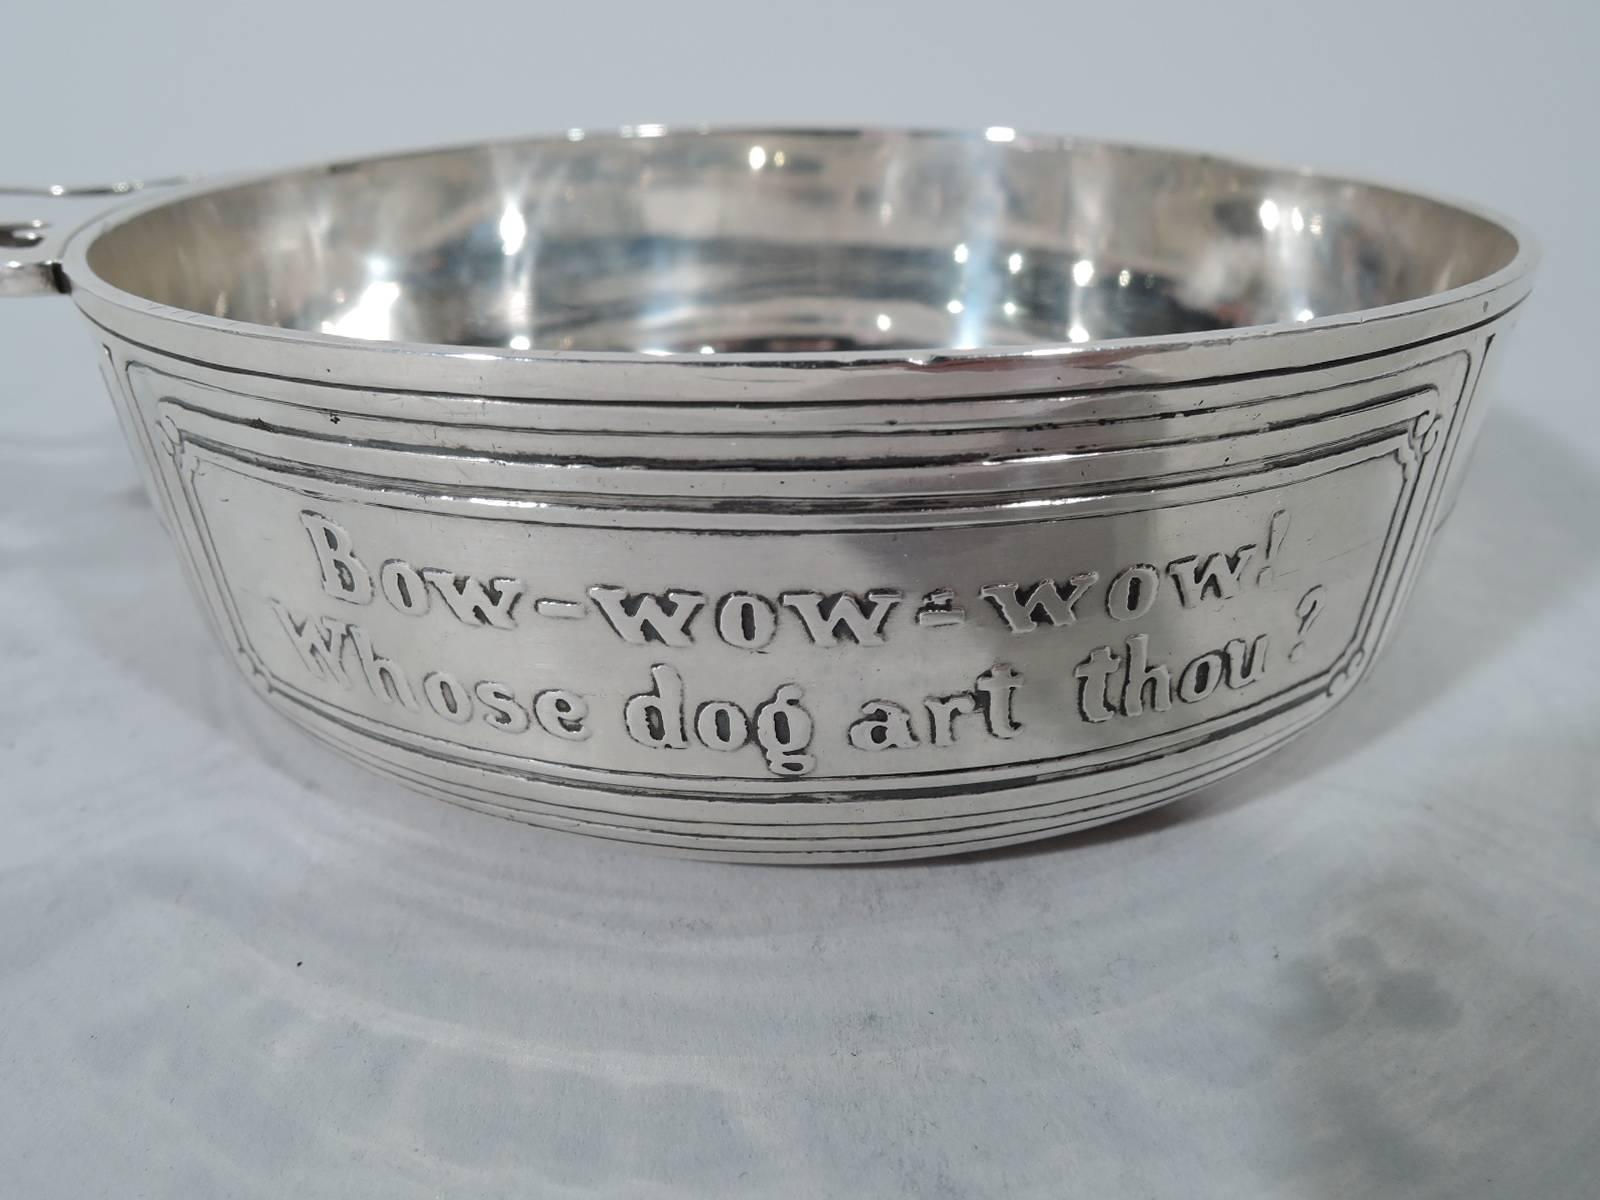 Edwardian sterling silver Mother Goose porringer. Made by Tiffany & Co. in New York. Bowl has straight sides with open tree handle. Acid-etched on exterior in pictures and text is Little Tom Tucker. In one frame: Bow-wow-wow! Whose dog are though?